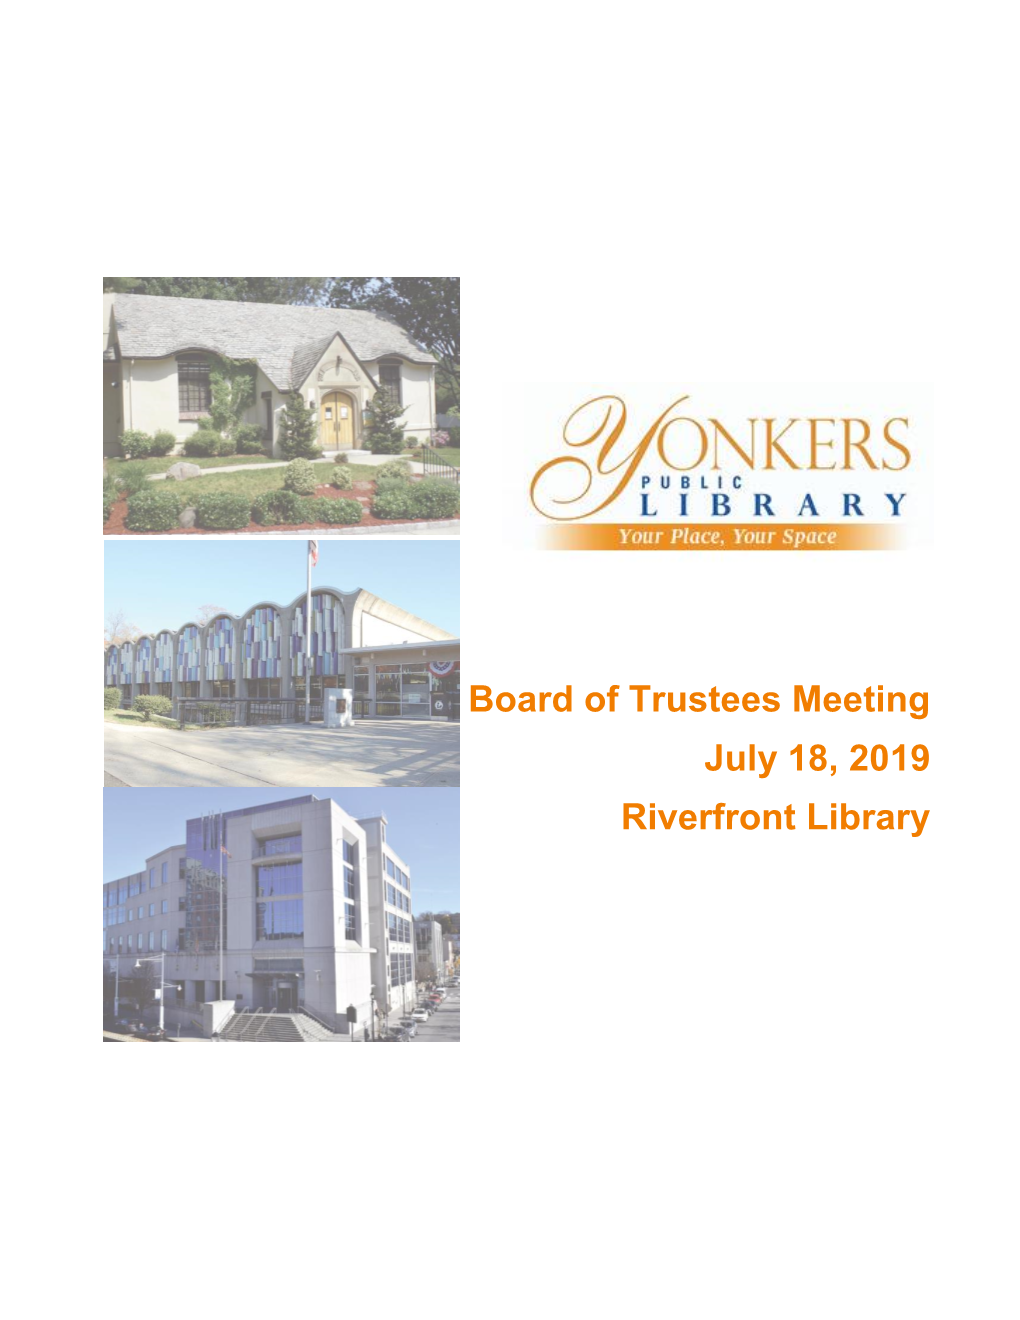 Board of Trustees Meeting July 18, 2019 Riverfront Library